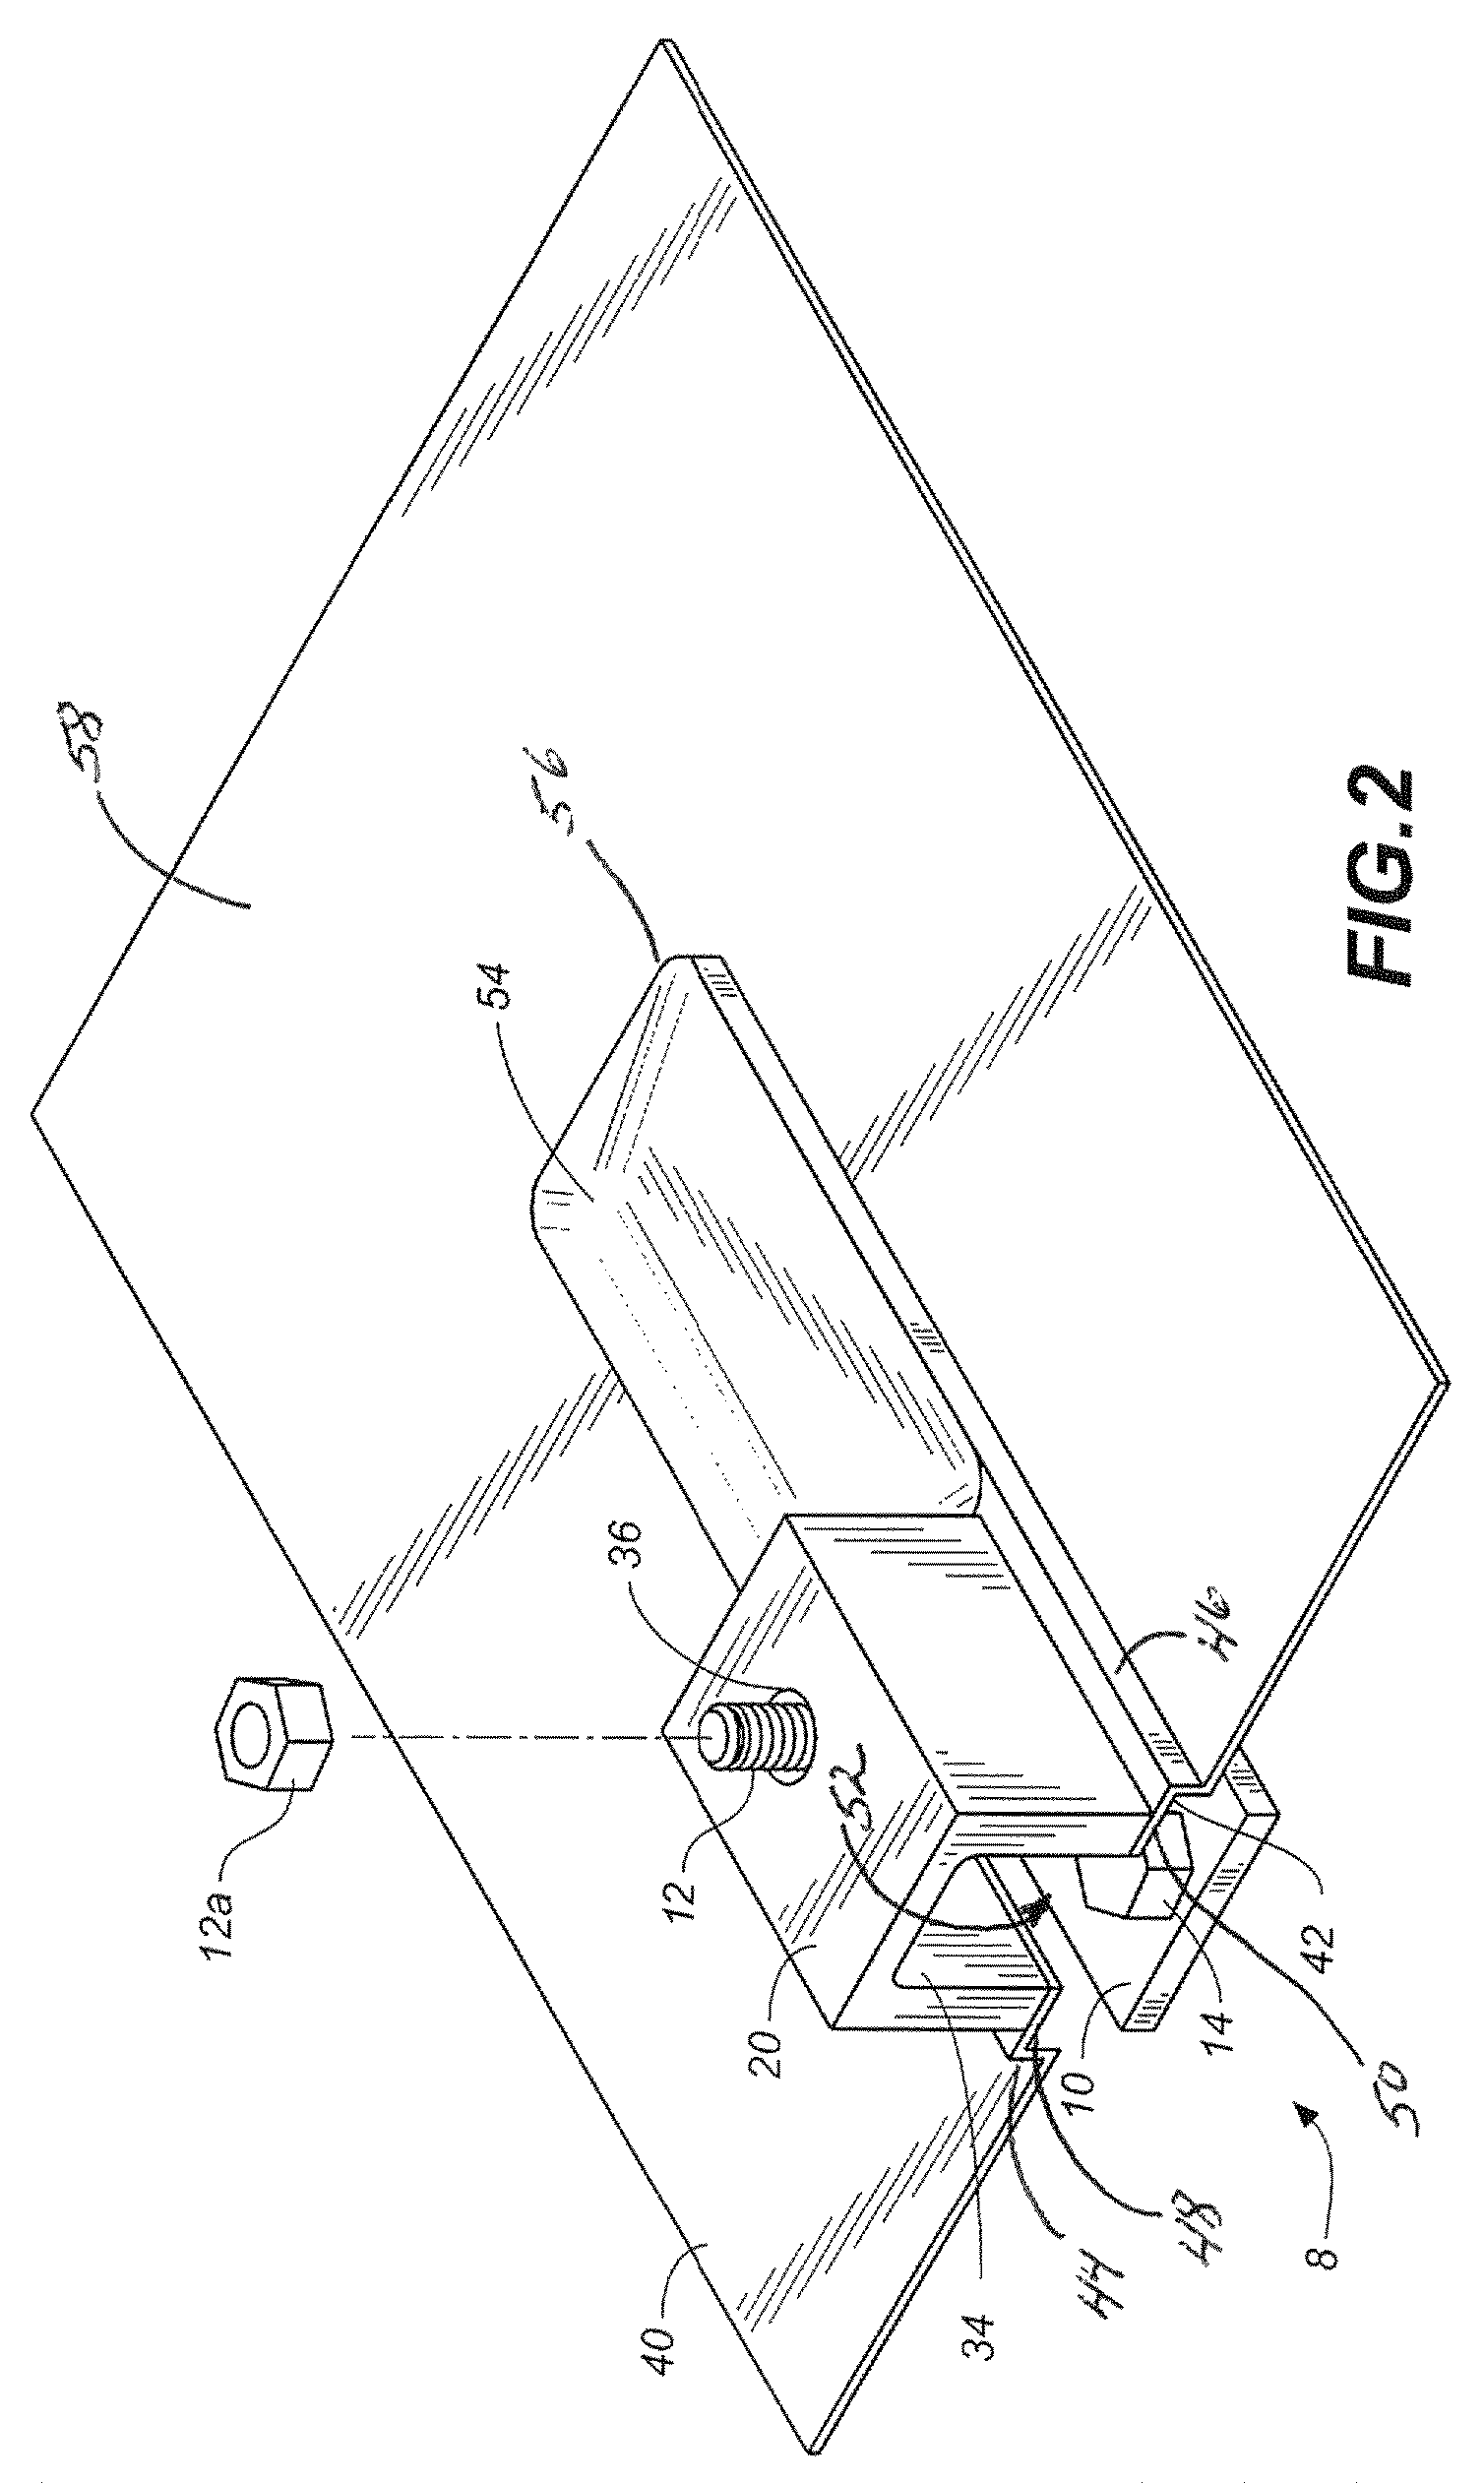 Apparatus for mounting a solar panel or other article to a roof or other structure